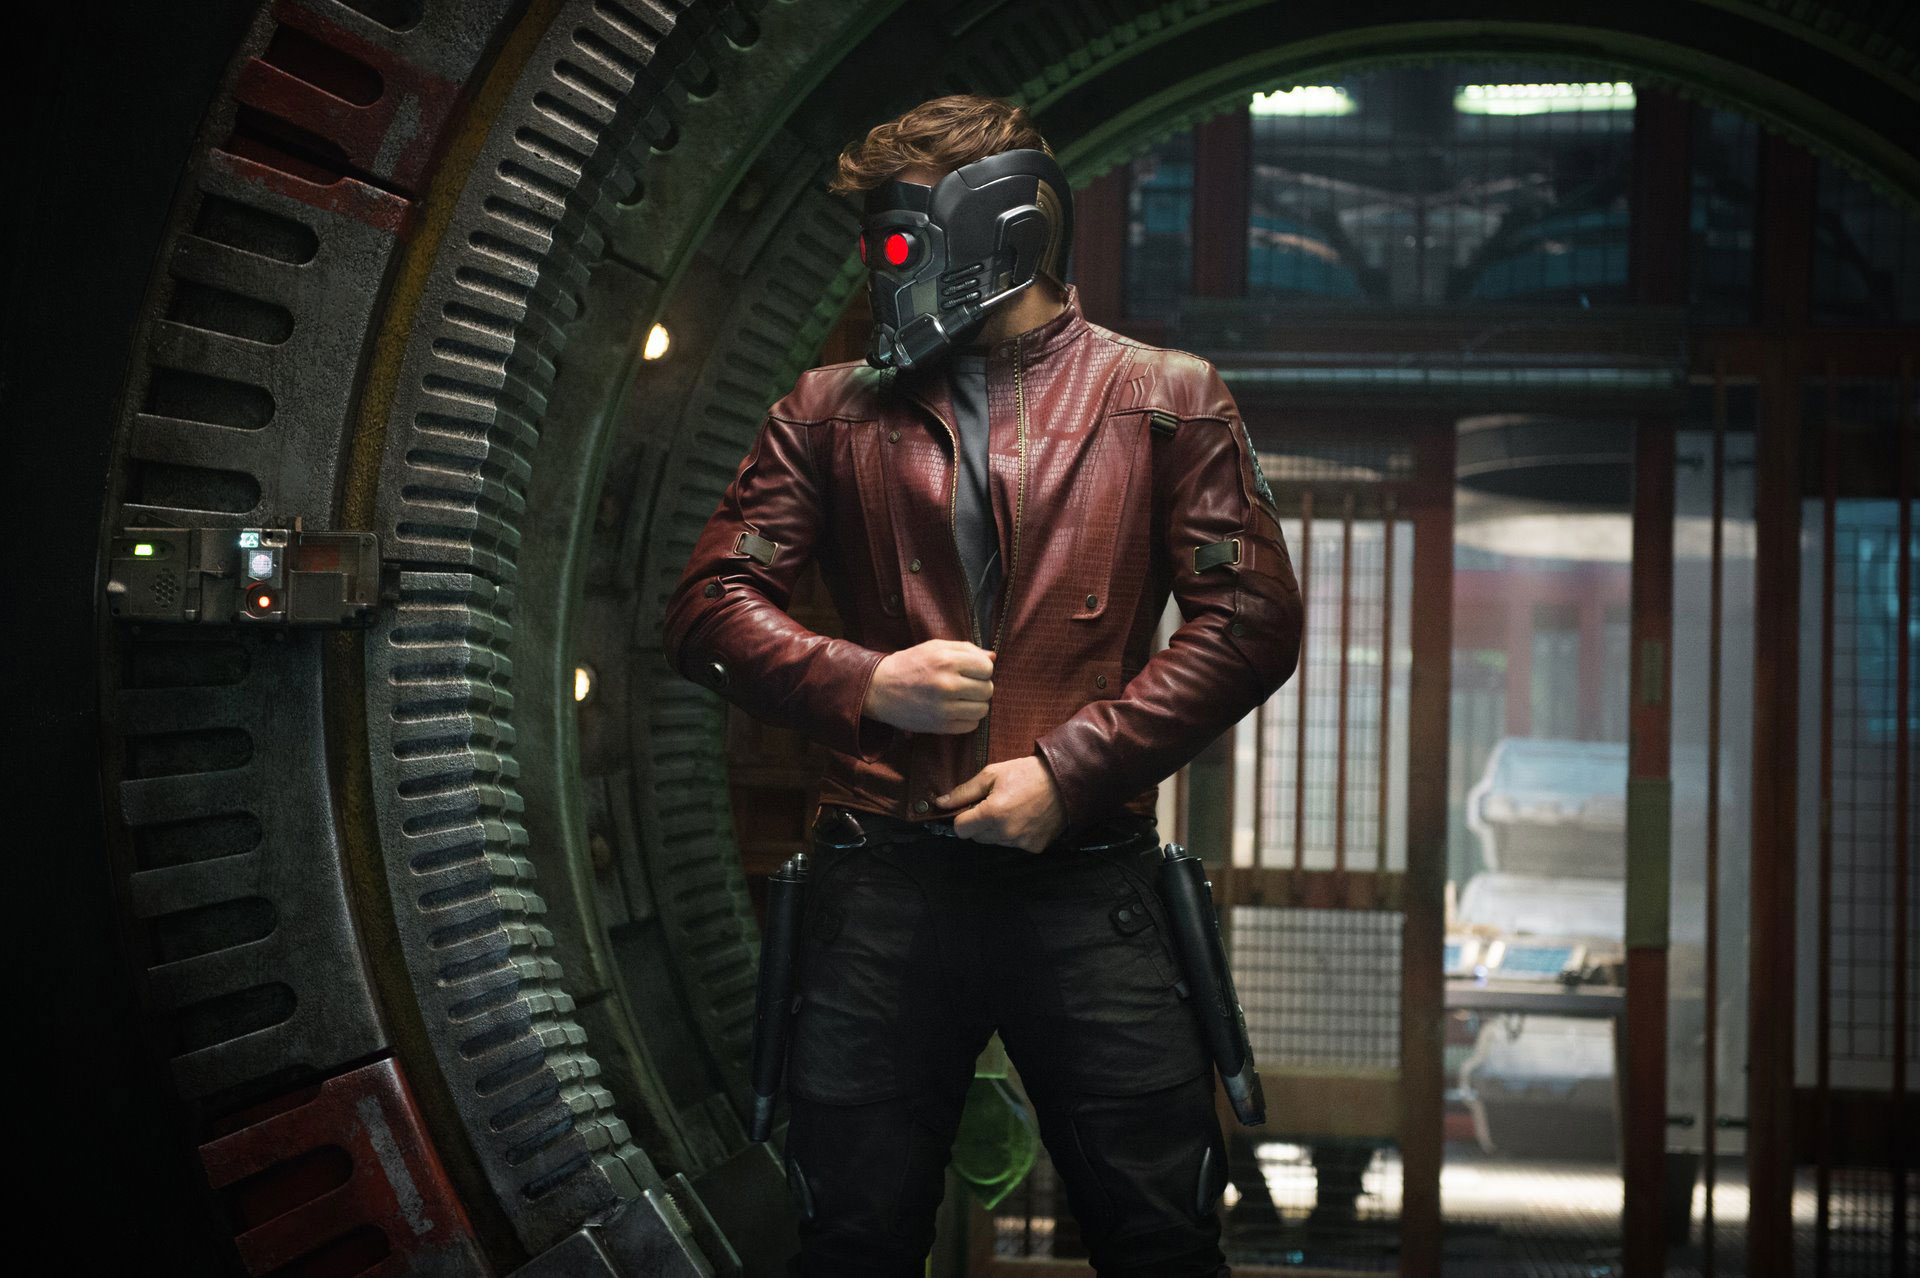 Star-Lord - The Film